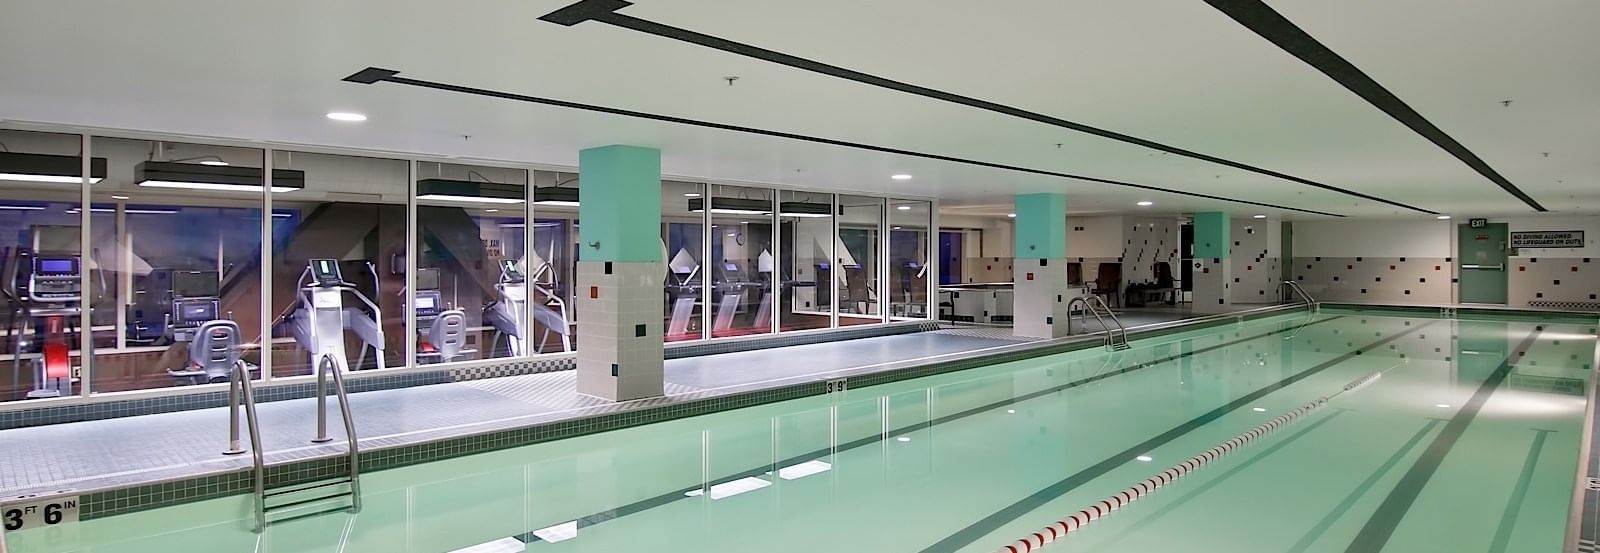 Large indoor swimming pool at The Grove Hotel